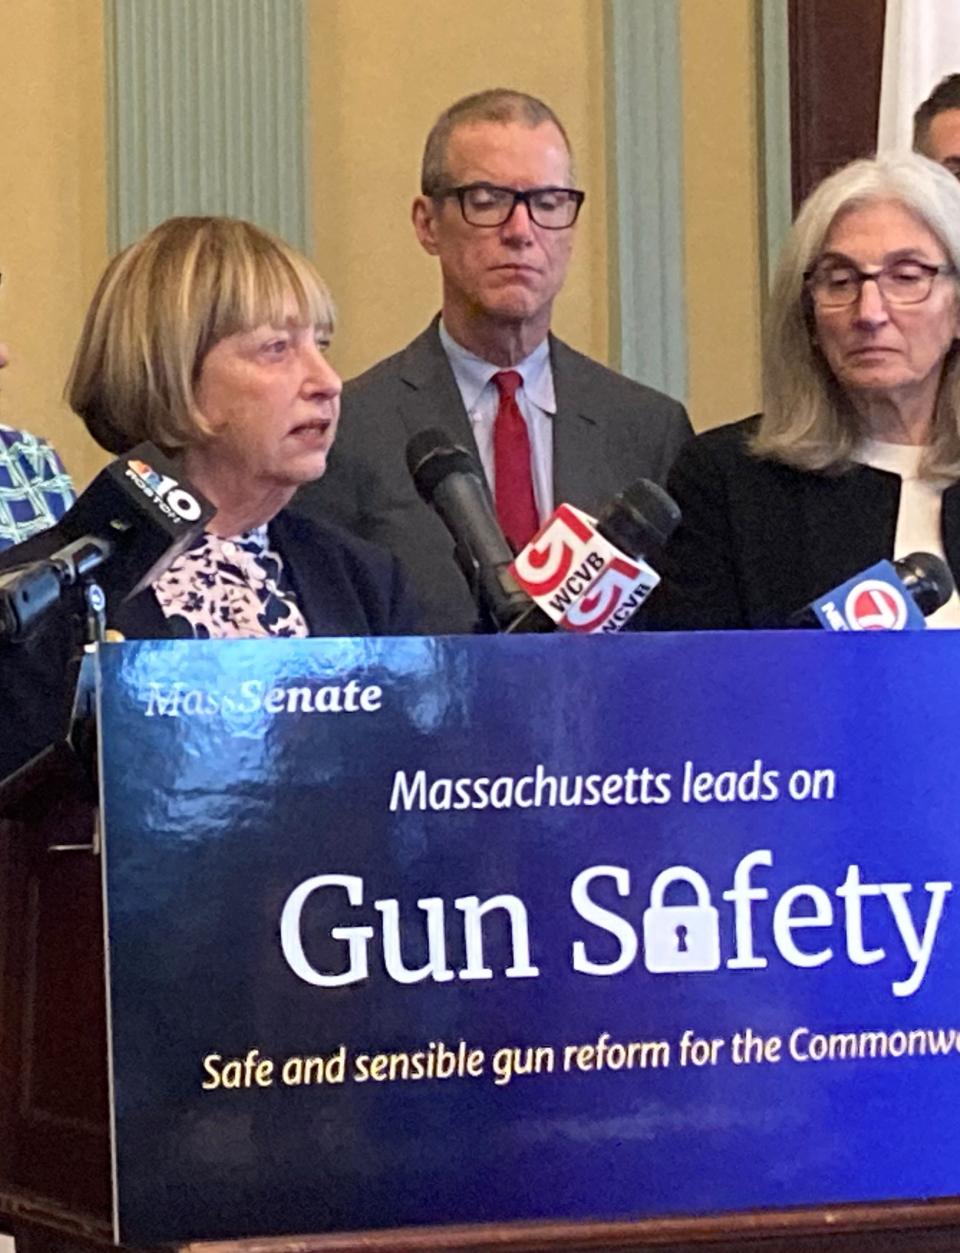 Senate Majority Leader Cynthia Creem discusses the details of the SAFER ACT filed Thursday and scheduled for a floor vote in the Senate Feb. 1.